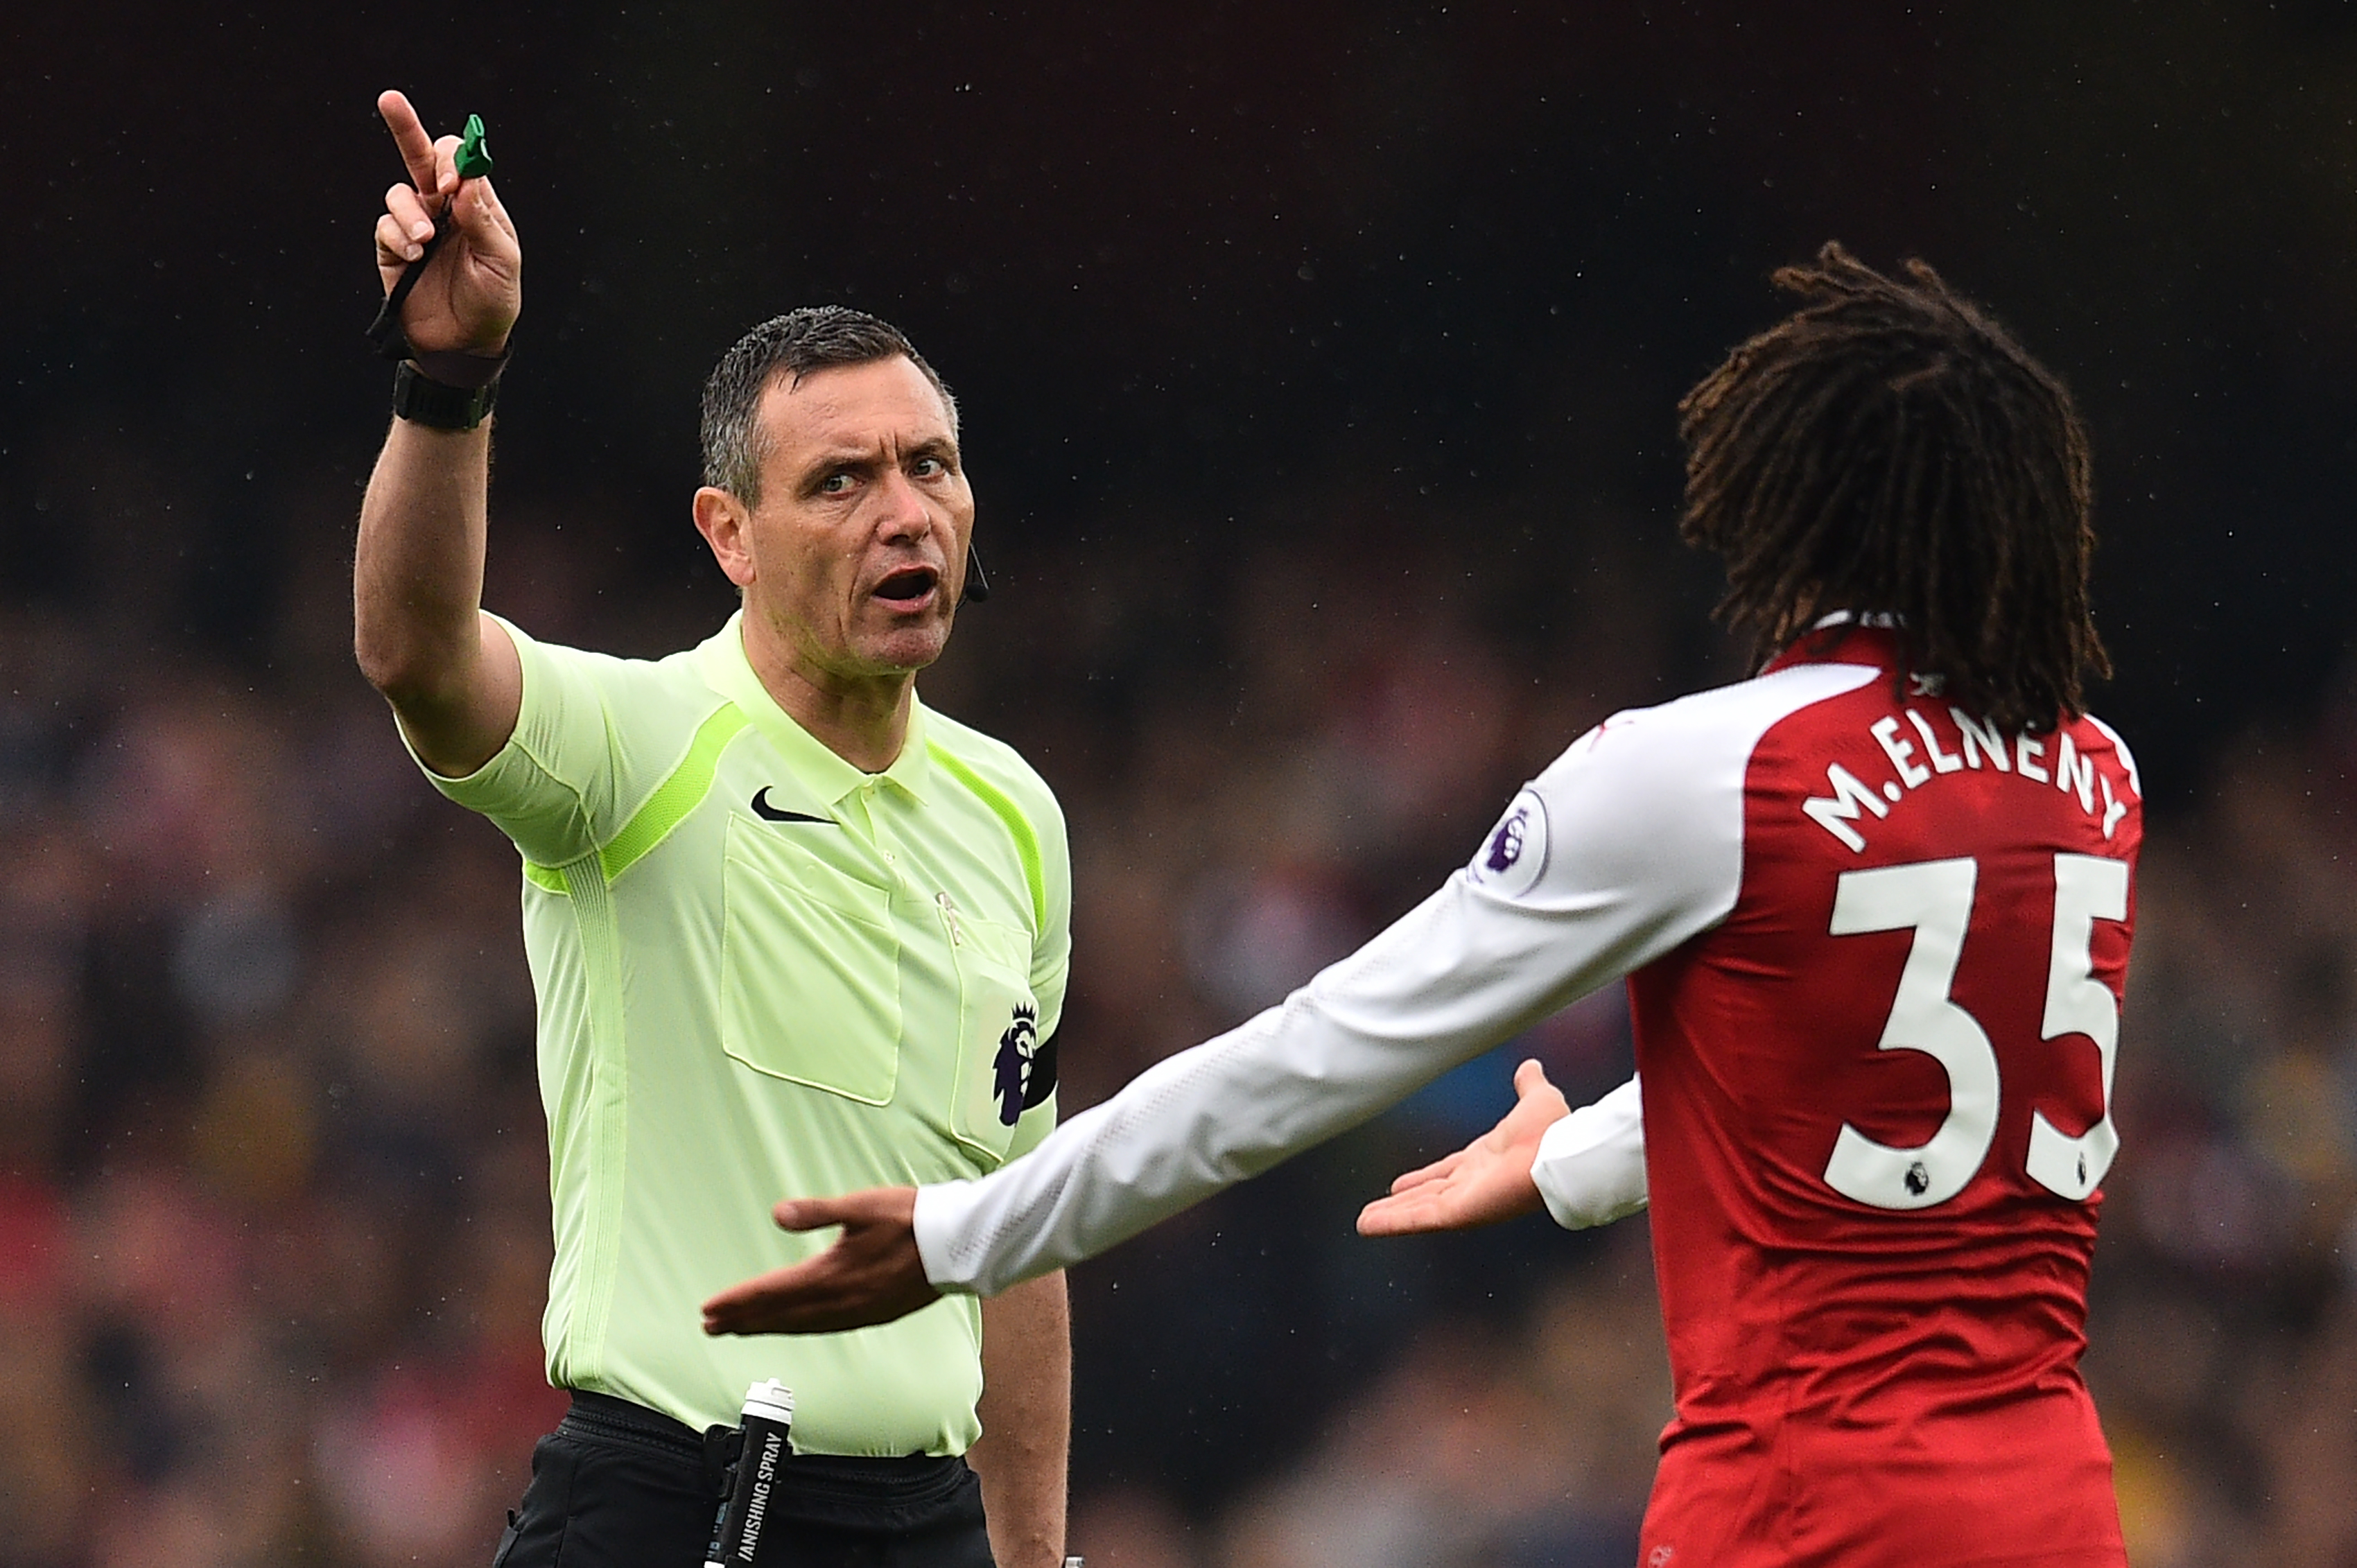 Elneny was sent off late in the game (Photo: GLYN KIRK/AFP/Getty Images)